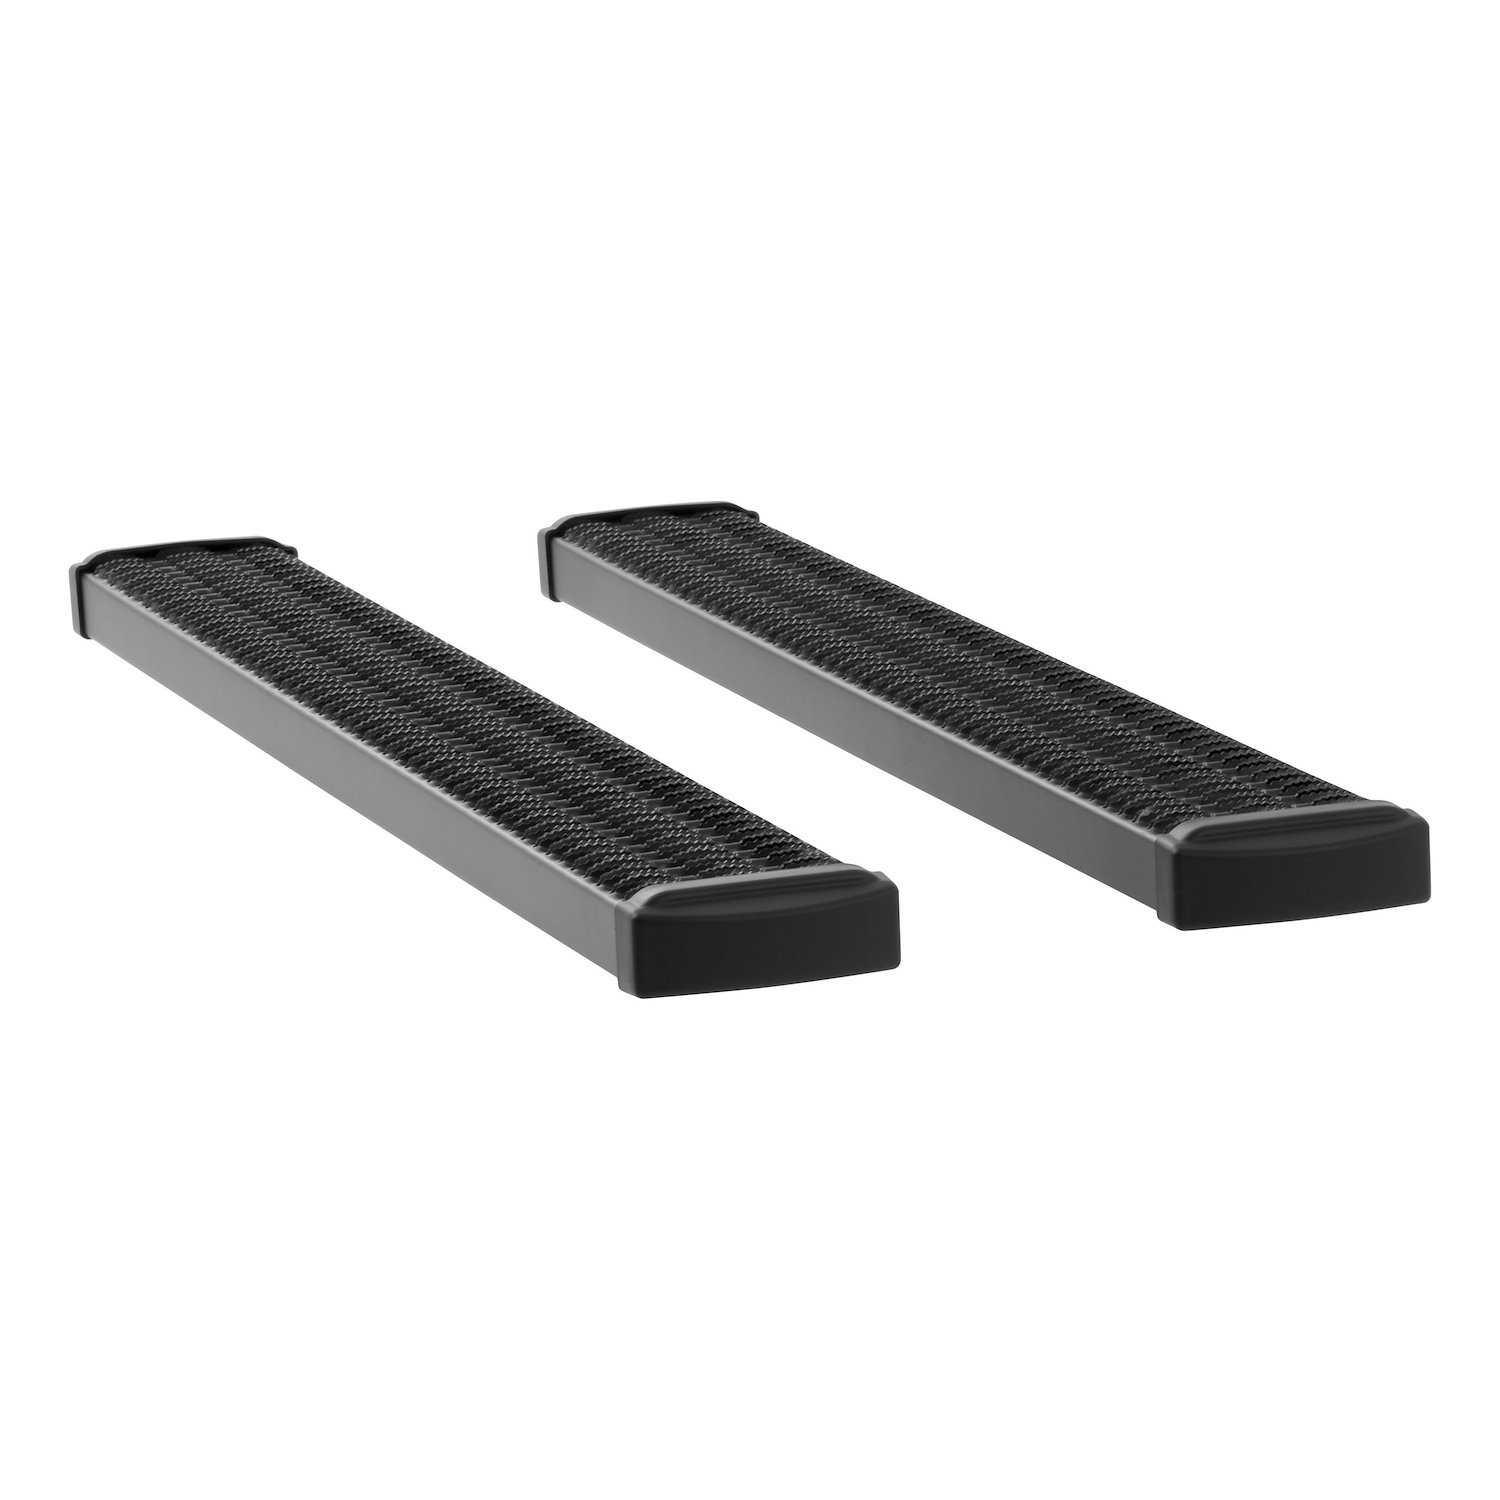 415060-401631 Grip Step 7 in. x 60 in. Black Aluminum Running Boards Fits Select Dodge, Ram